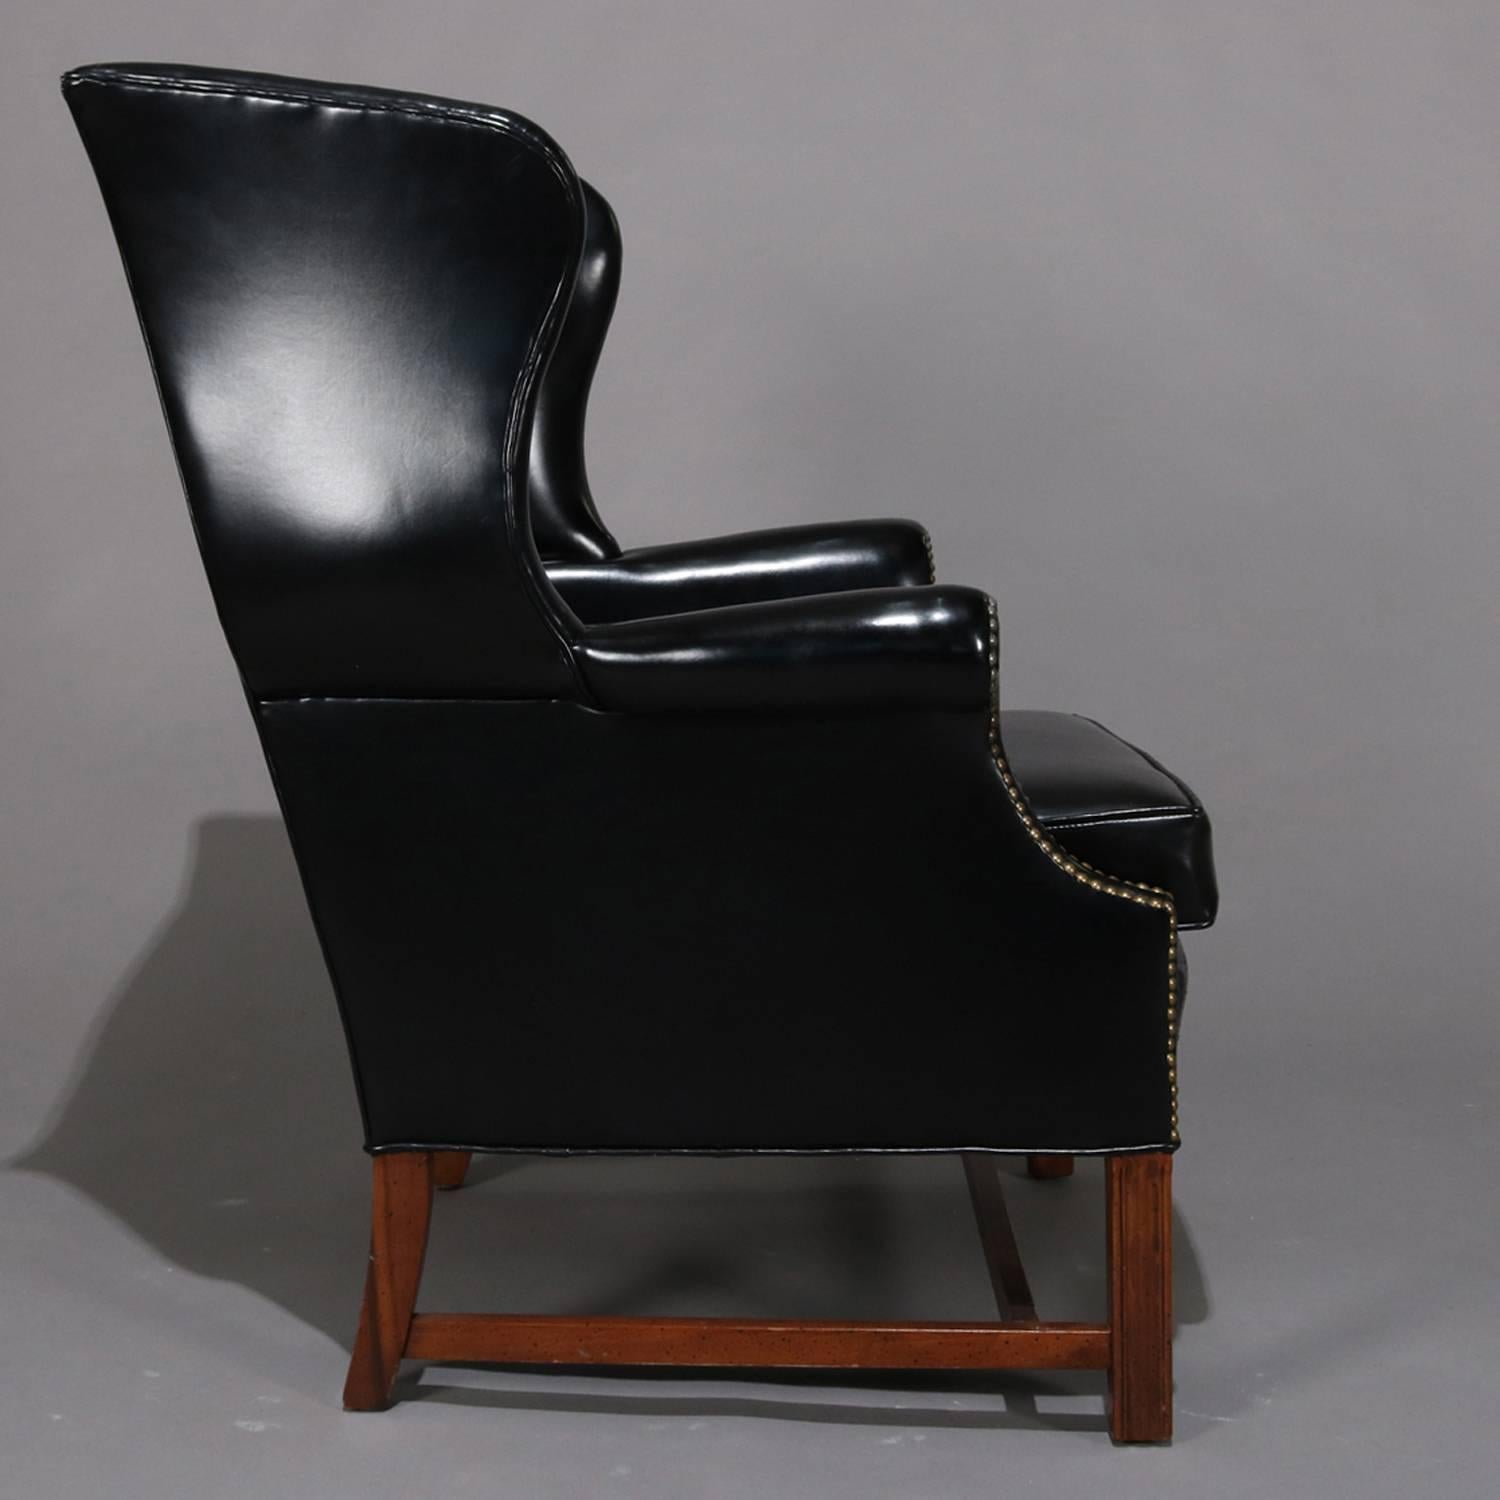 American Chippedale Style Fireside Wingback Armchair, Black, 20th Century